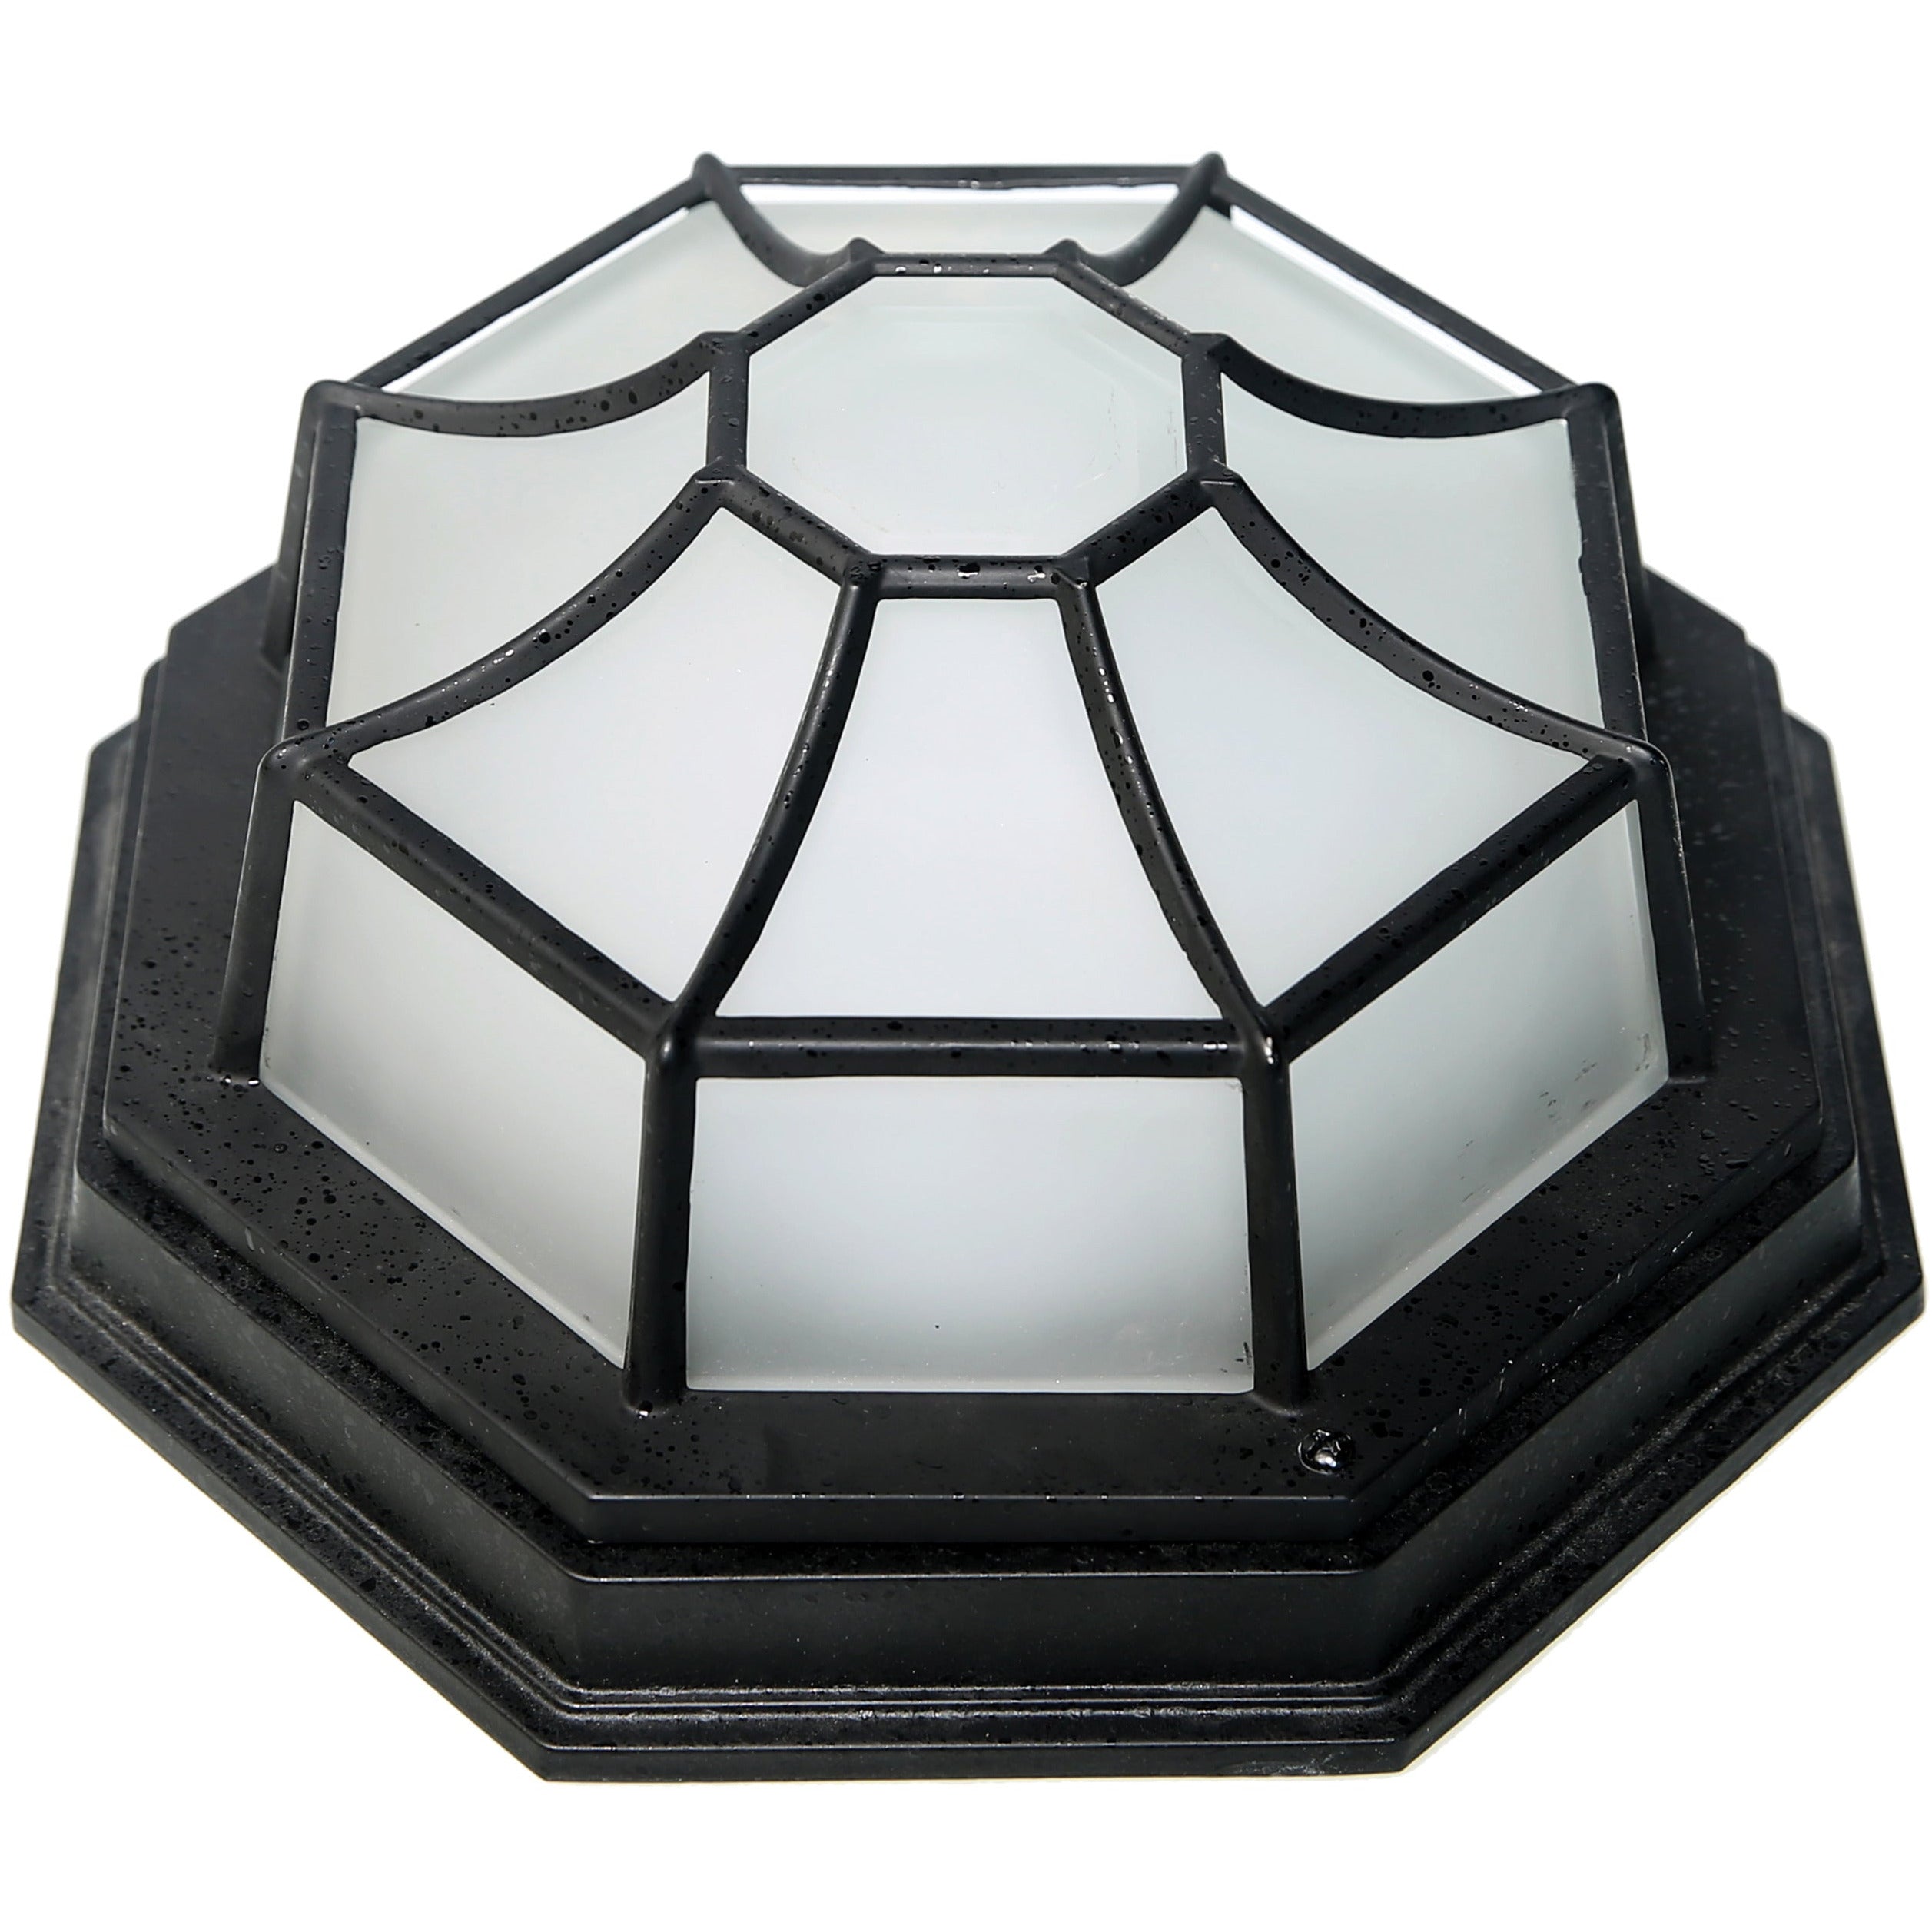 LED Spider Caged Outdoor Ceiling Light